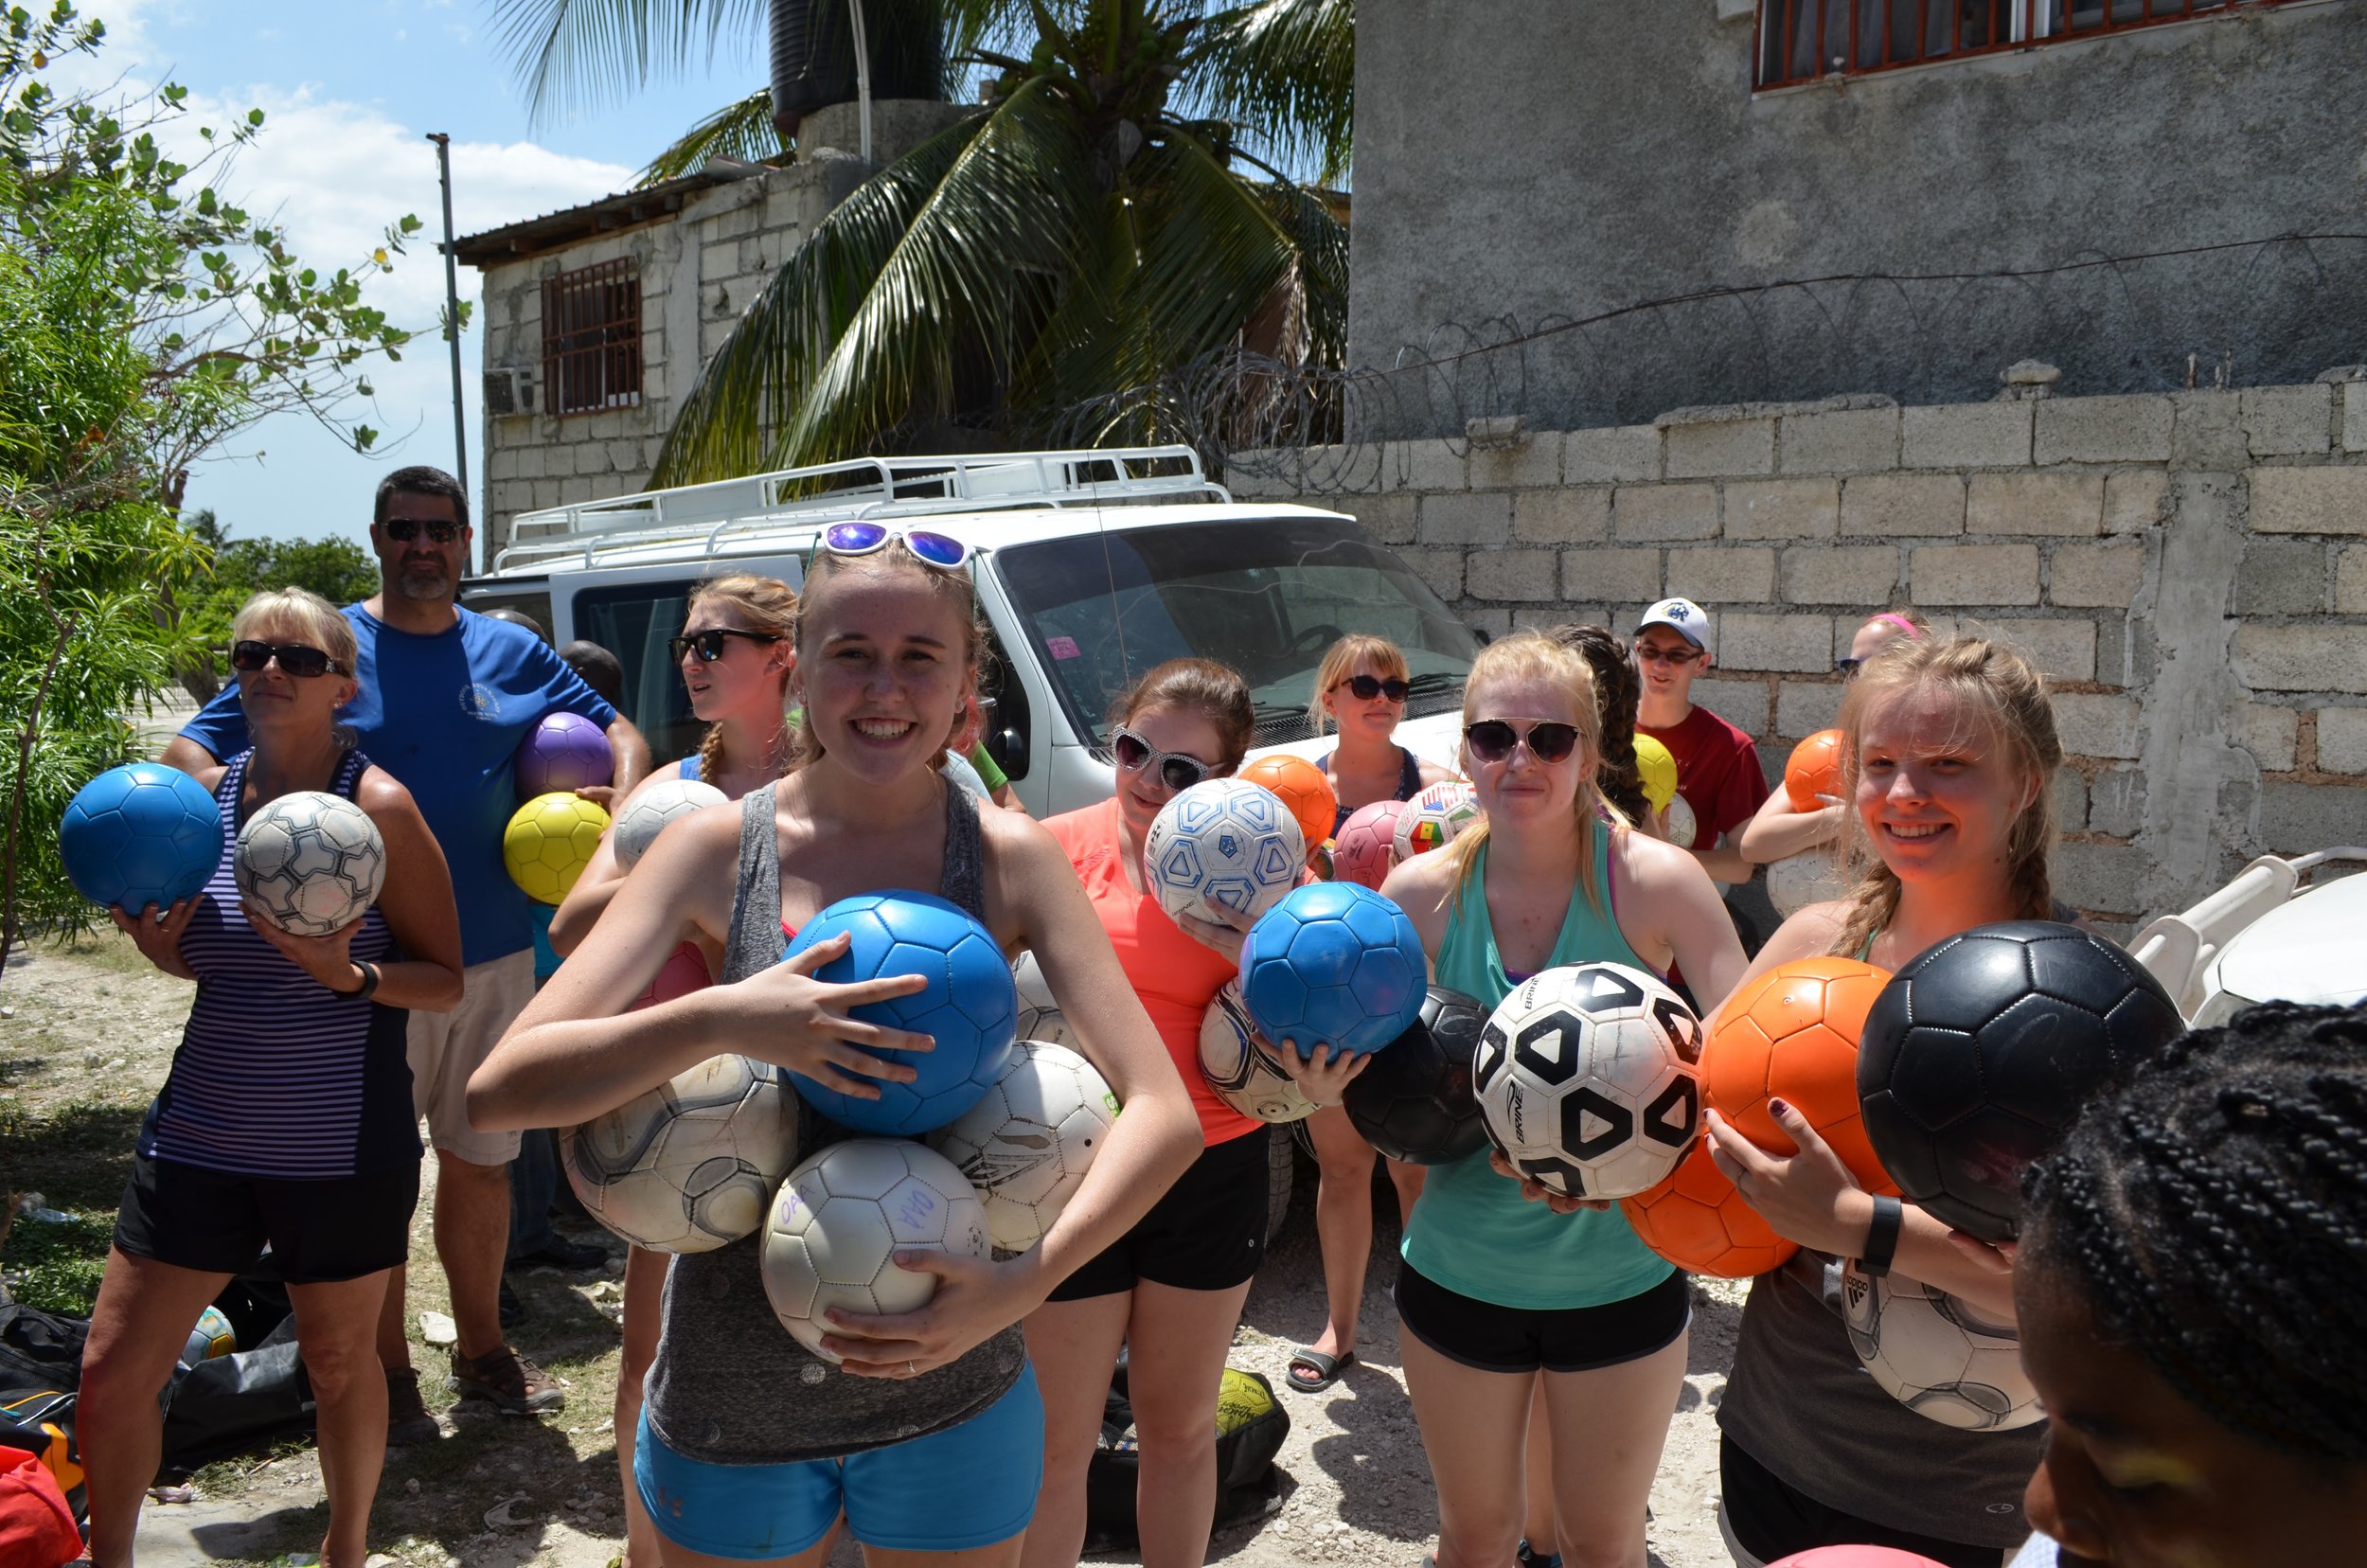  Soccer ball delivery to all the students! 